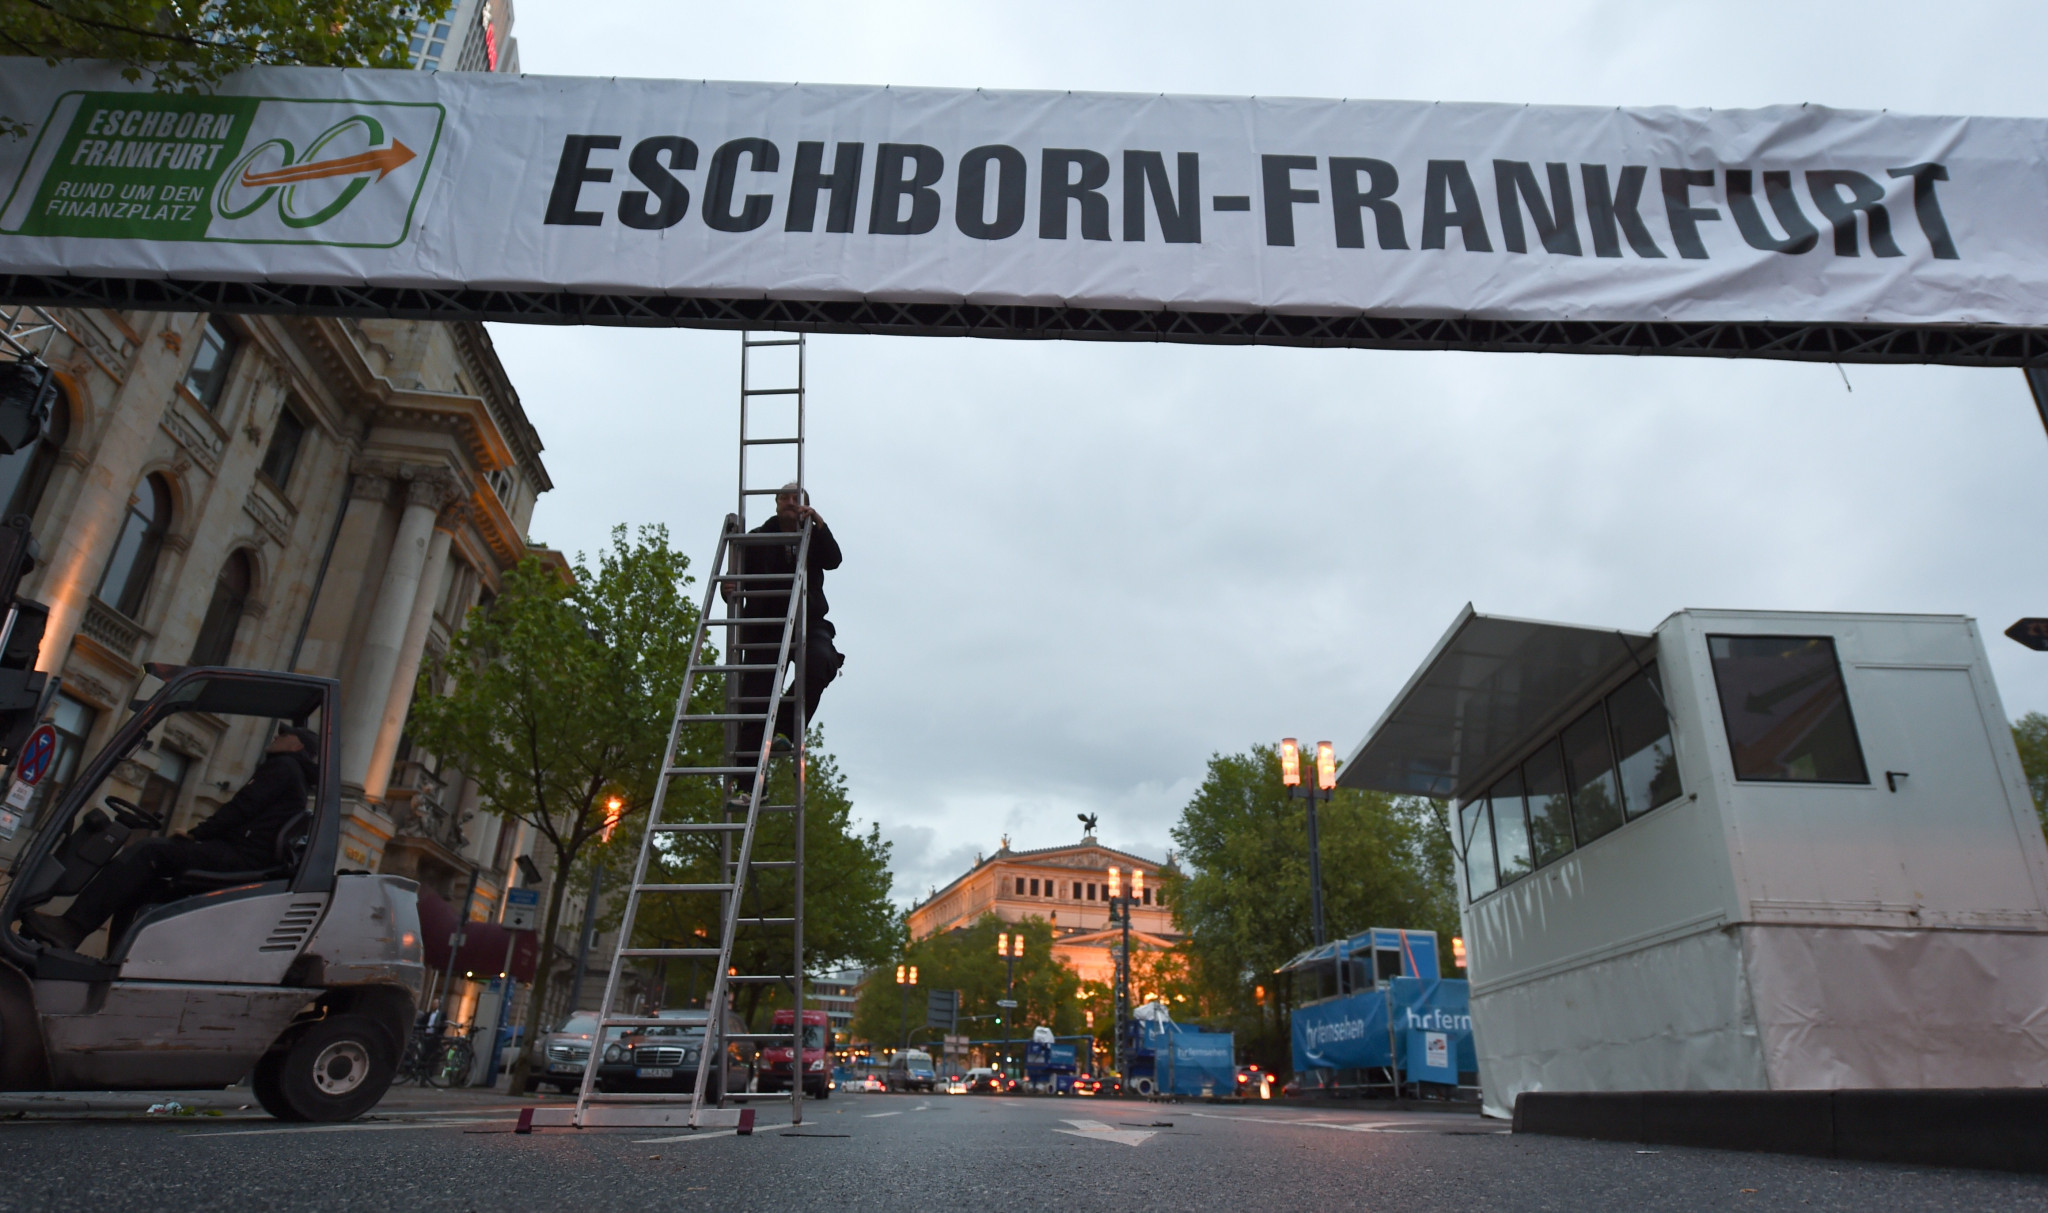 Eschborn-Frankfurt welcomes UCI WorldTour to Germany for first time this season